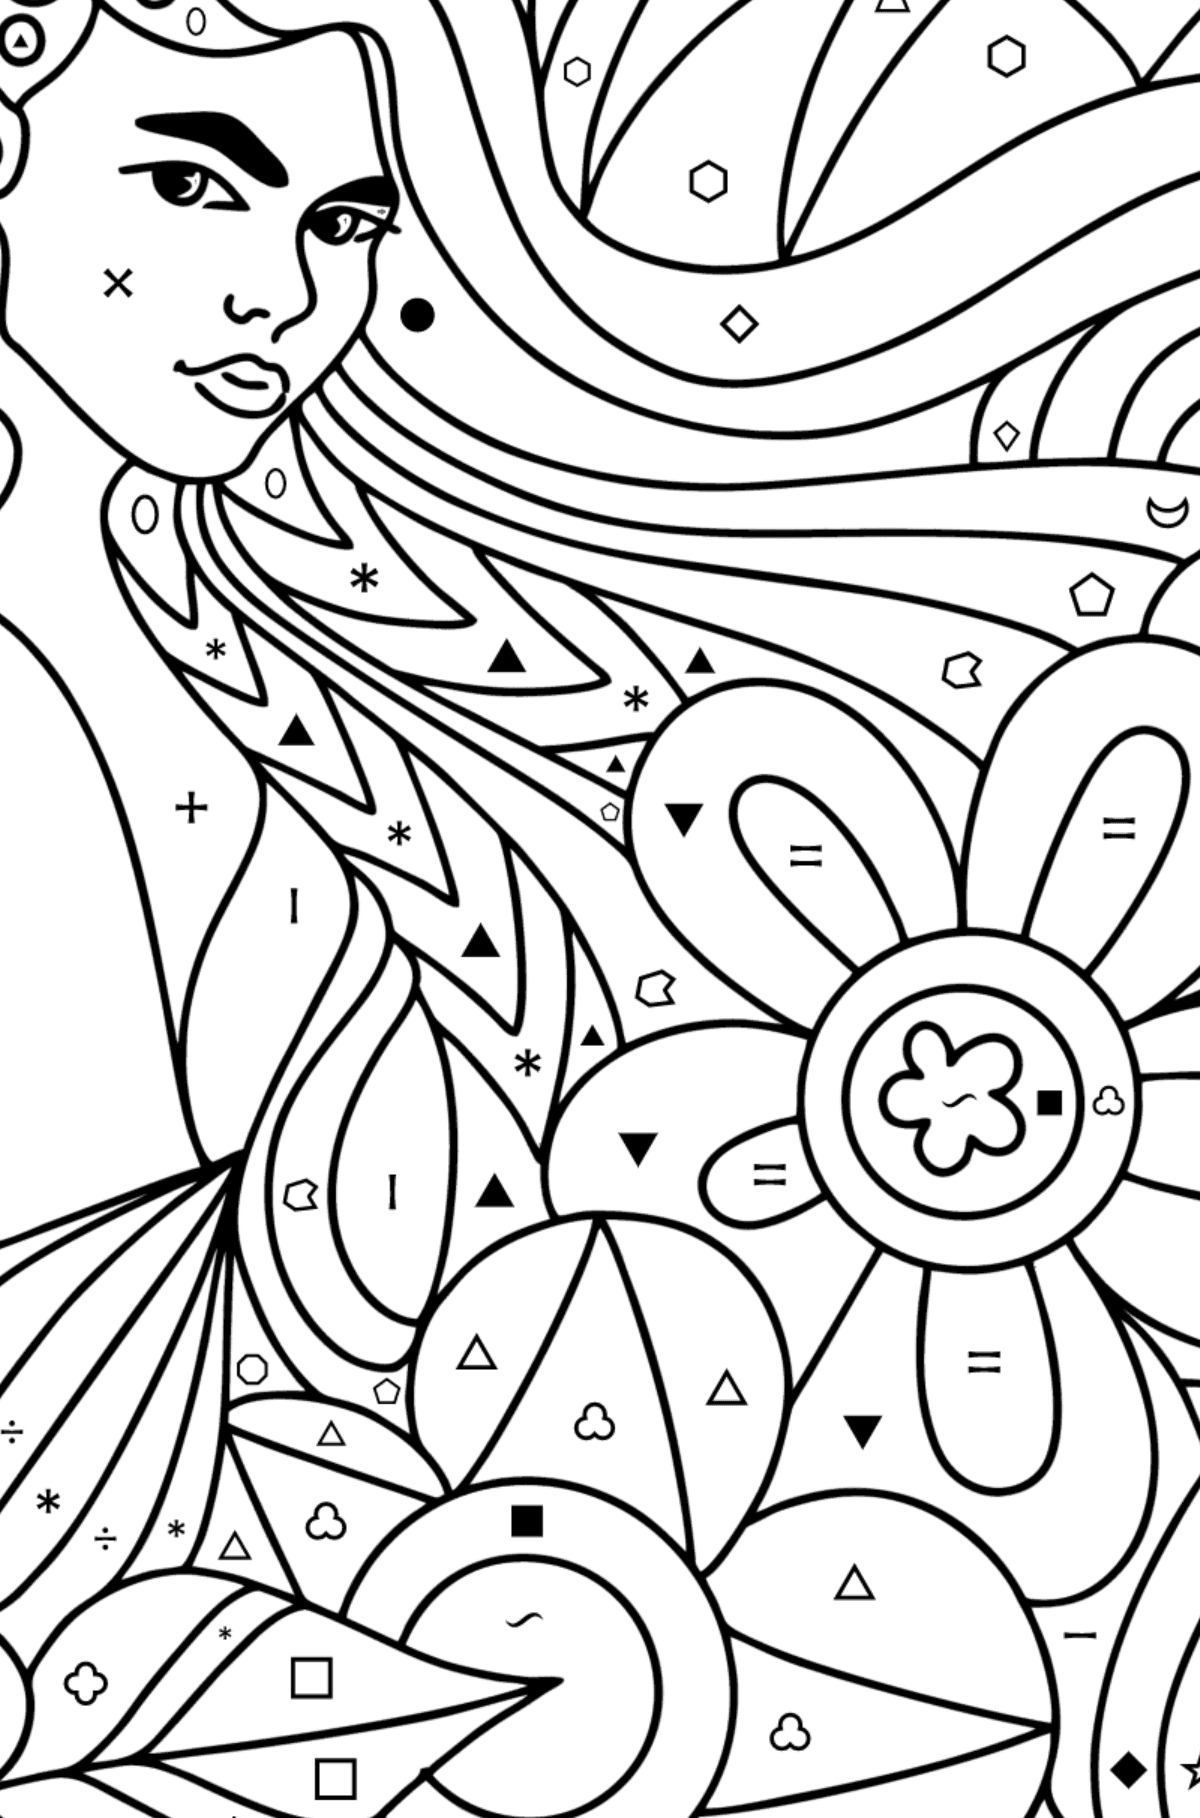 Art Therapy coloring page for kids - Coloring by Symbols and Geometric Shapes for Kids